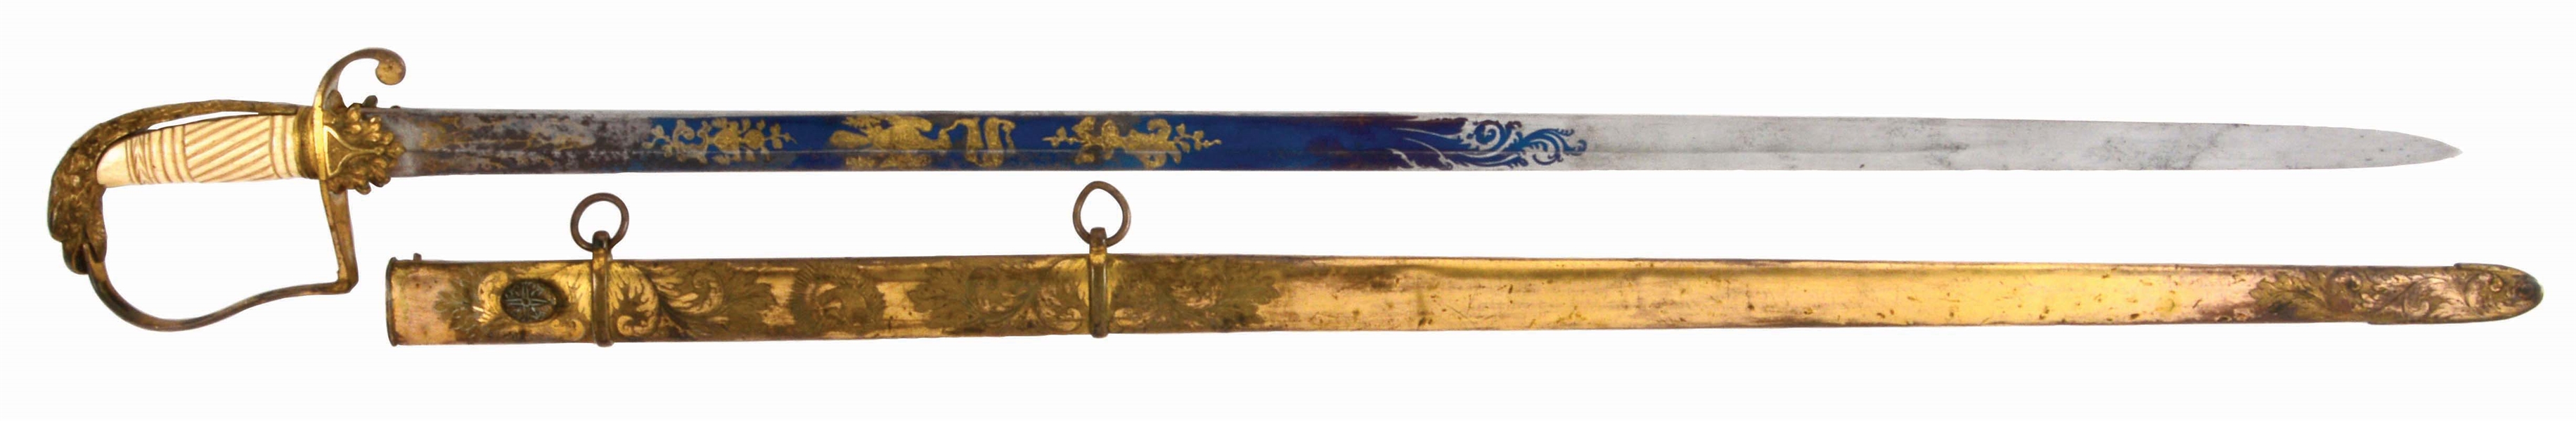 ATTRACTIVE AMERICAN EAGLE HEAD POMMEL OFFICERS SWORD WITH SCABBARD.